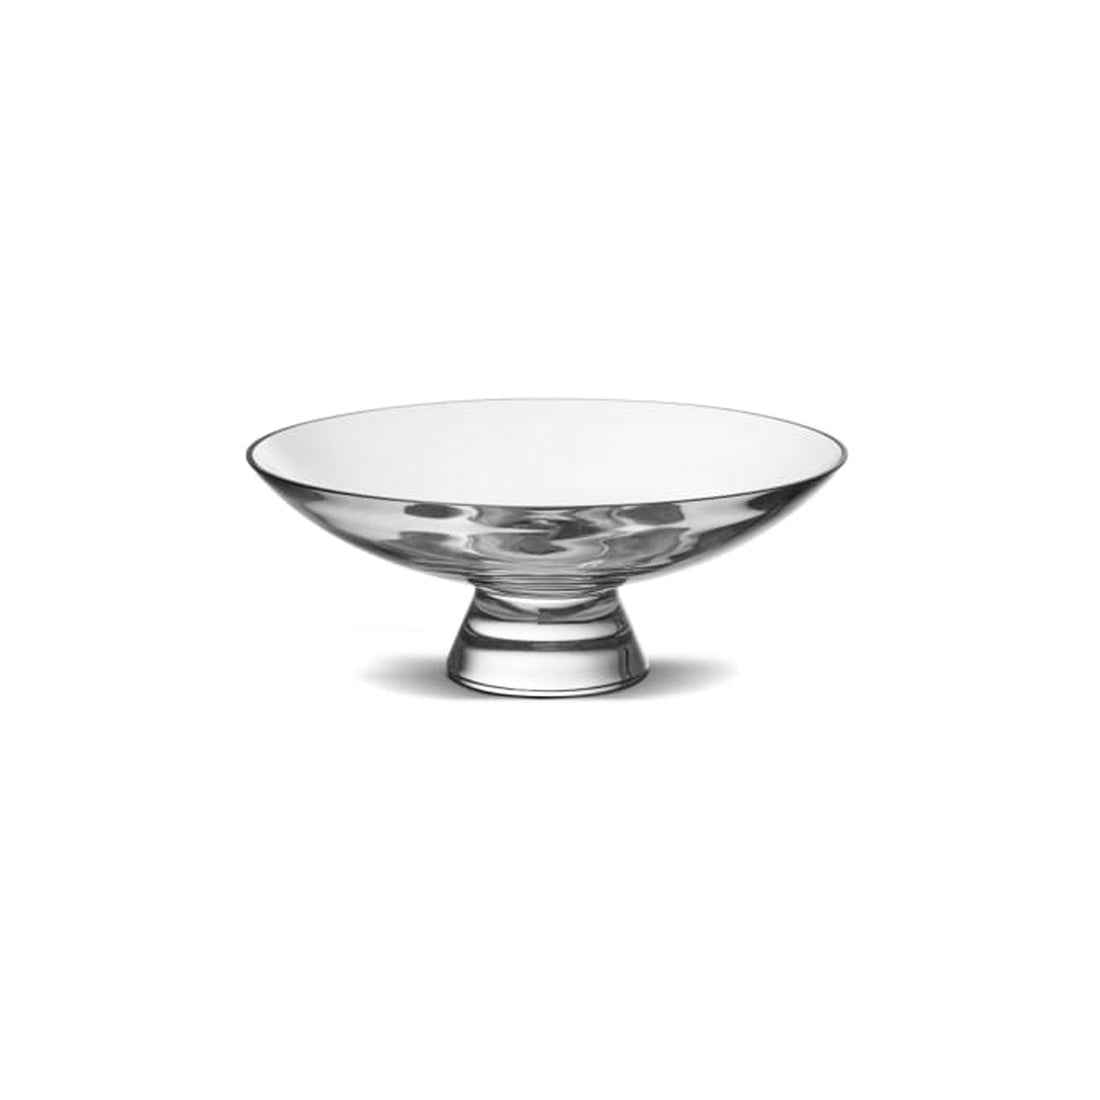 Nude Glass Silhouette Bowl medium in clear lead-free glass